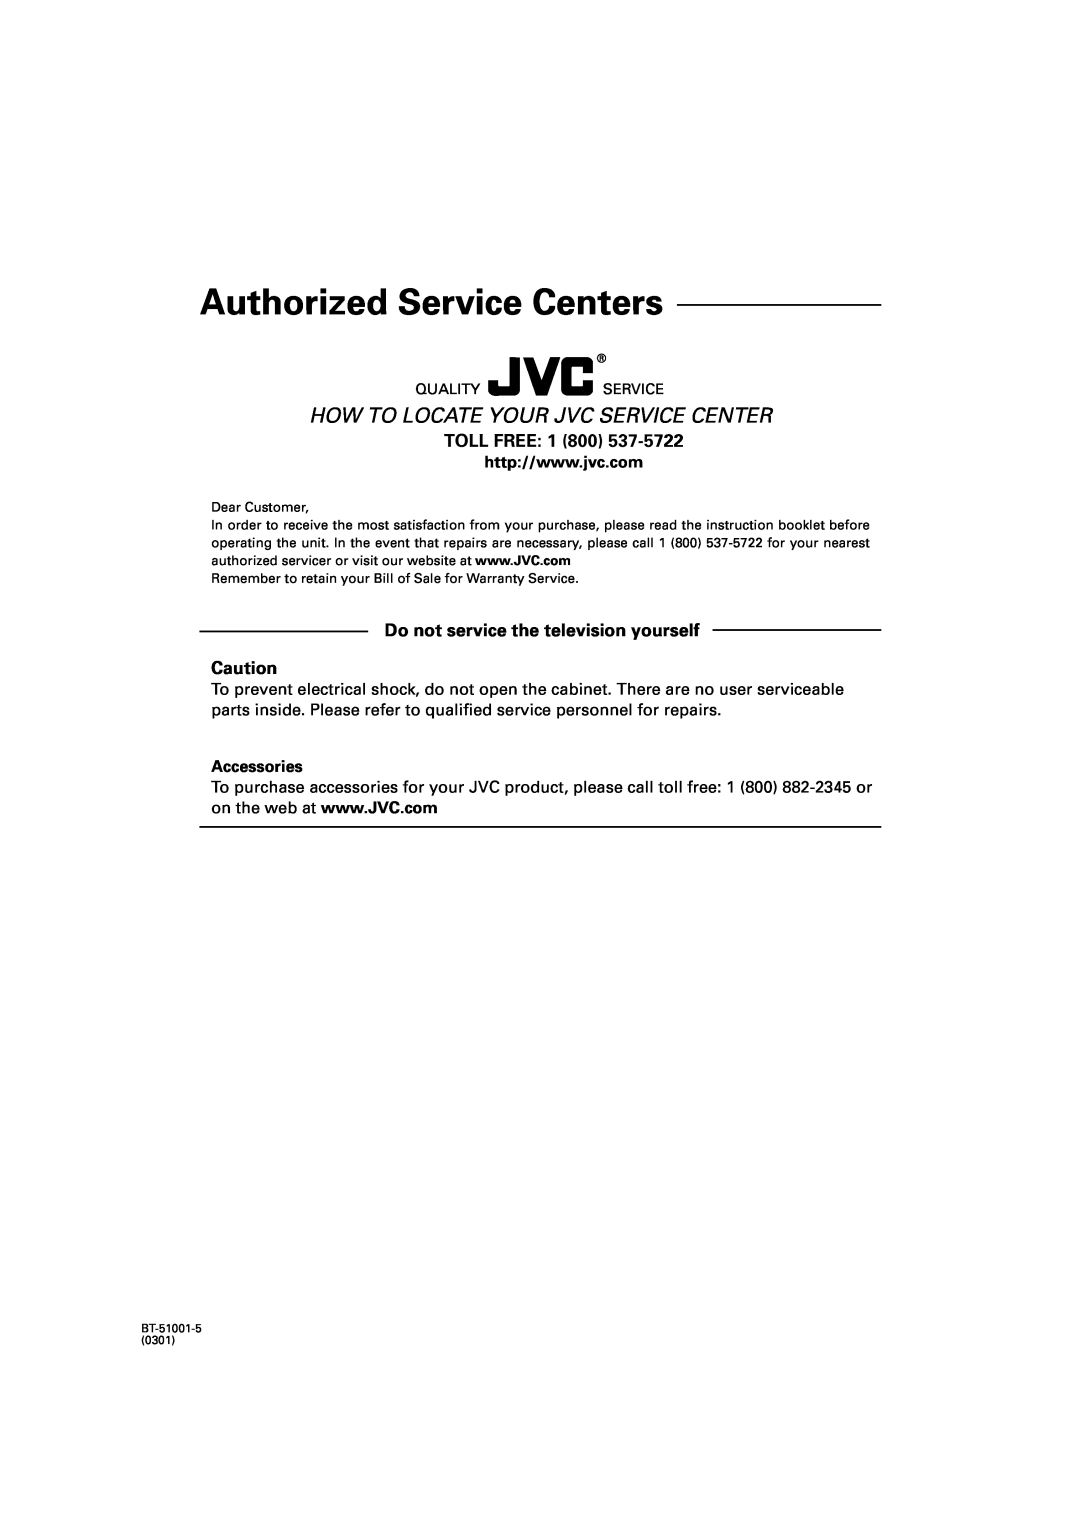 JVC HX-Z10 manual Toll Free, Do not service the television yourself, Authorized Service Centers, Accessories 